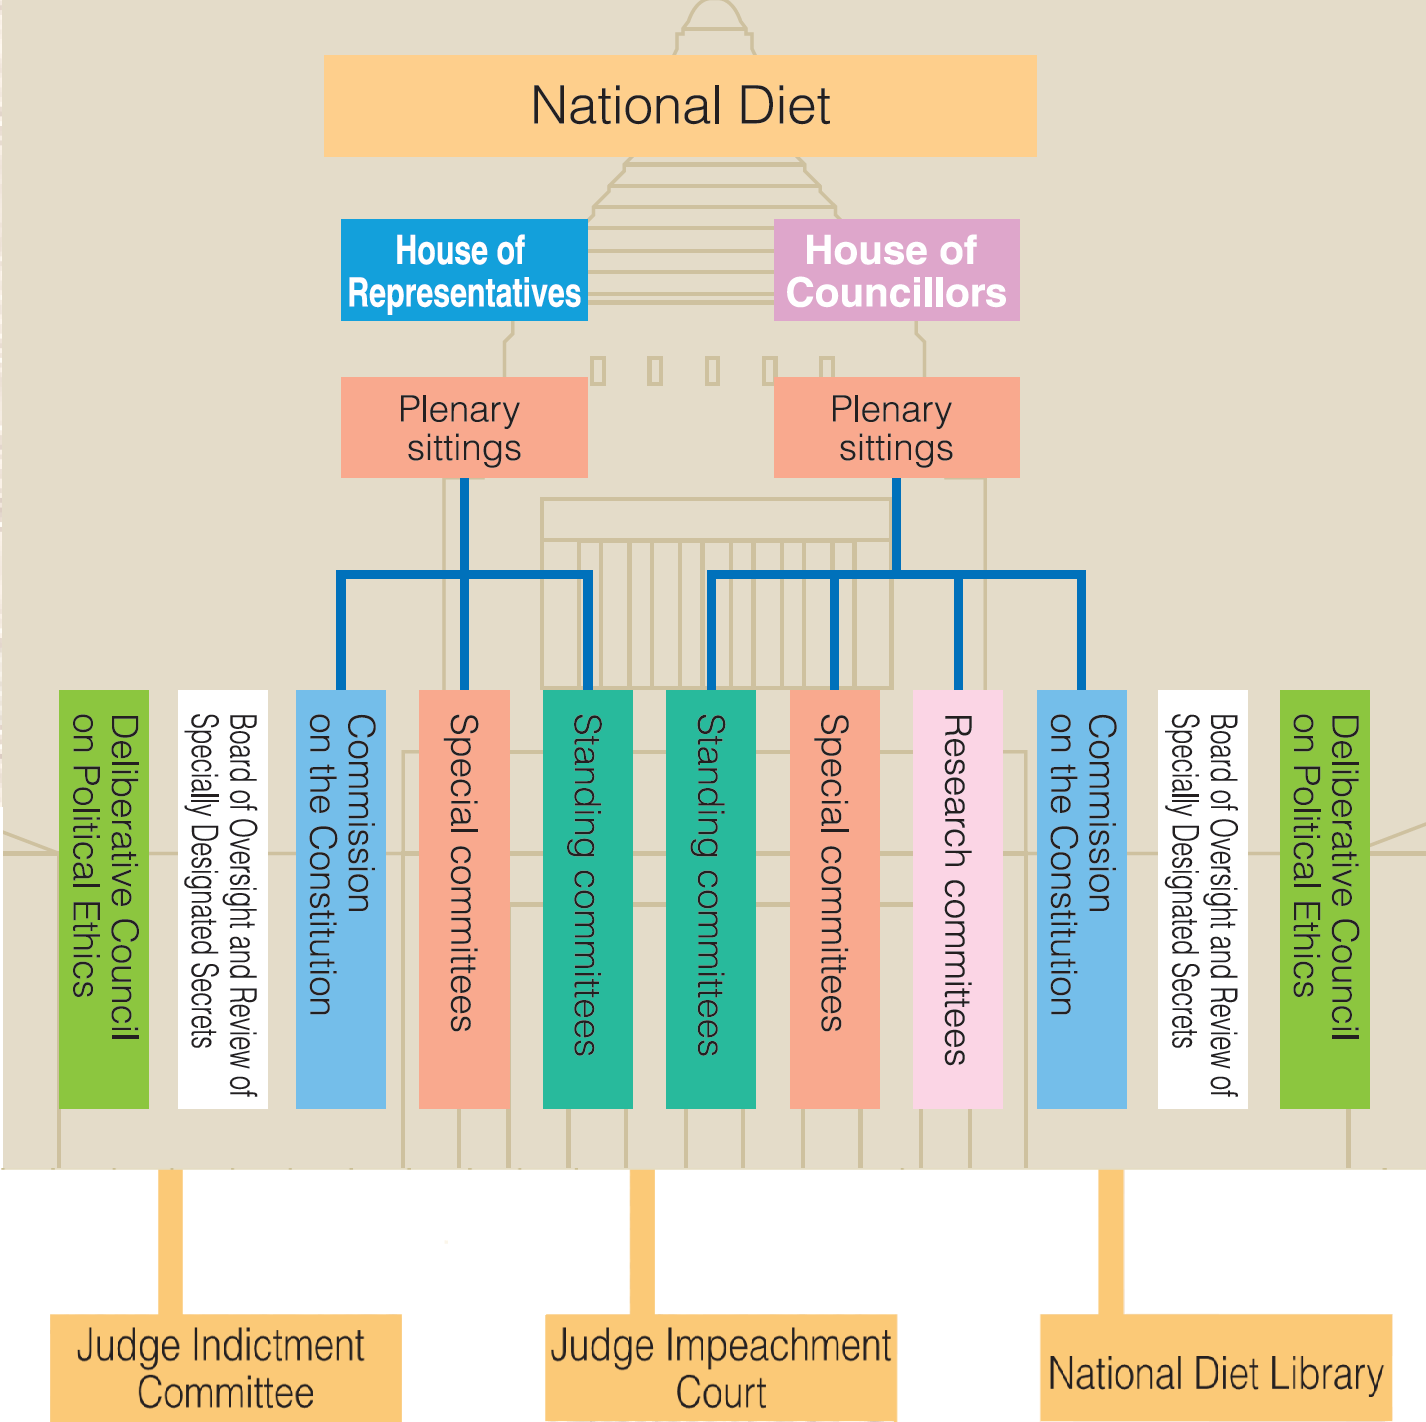 Structure of the National Diet